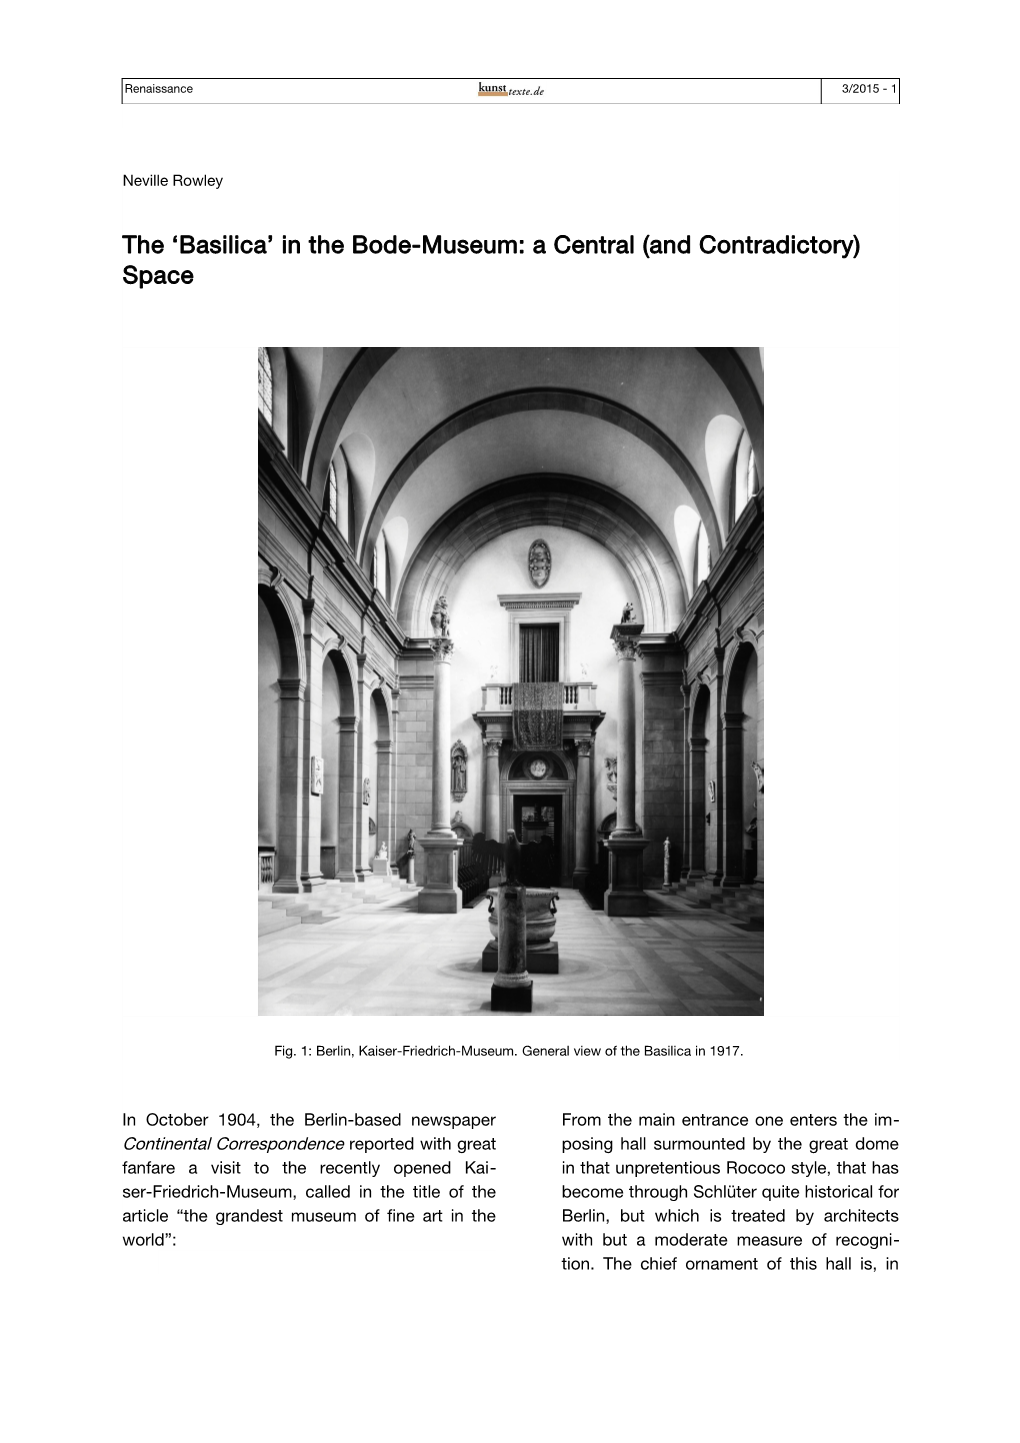 The 'Basilica' in the Bode-Museum: a Central (And Contradictory) Space